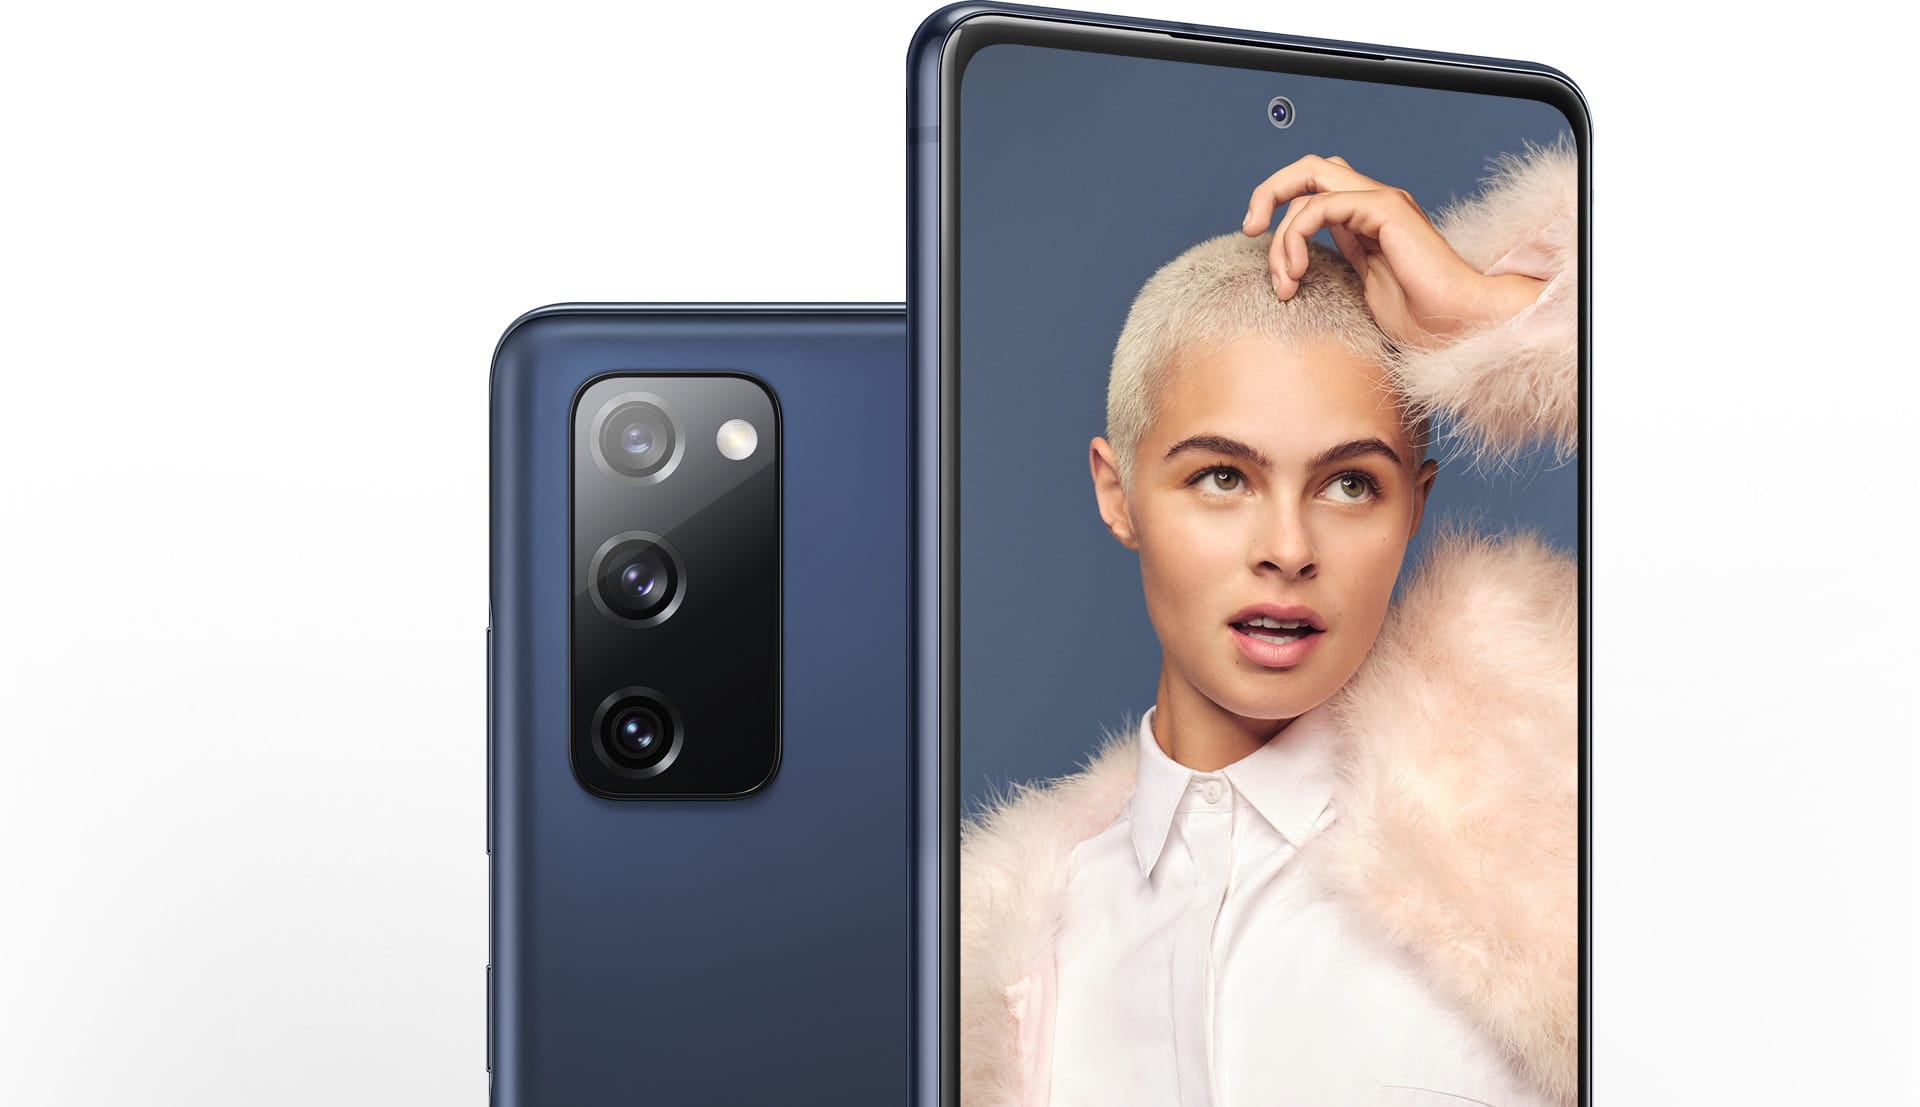 Two Galaxy S20 FE phones in Cloud Navy, one seen from the rear and one seen from the front. The phone seen from the rear shows the locations of the 12MP Ultra Wide Camera, 12MP Wide-angle Camera, and 8MP Telephoto Camera. The phone seen from the front has a portrait of a woman onscreen, and shows the location of the 32MP Front Camera.